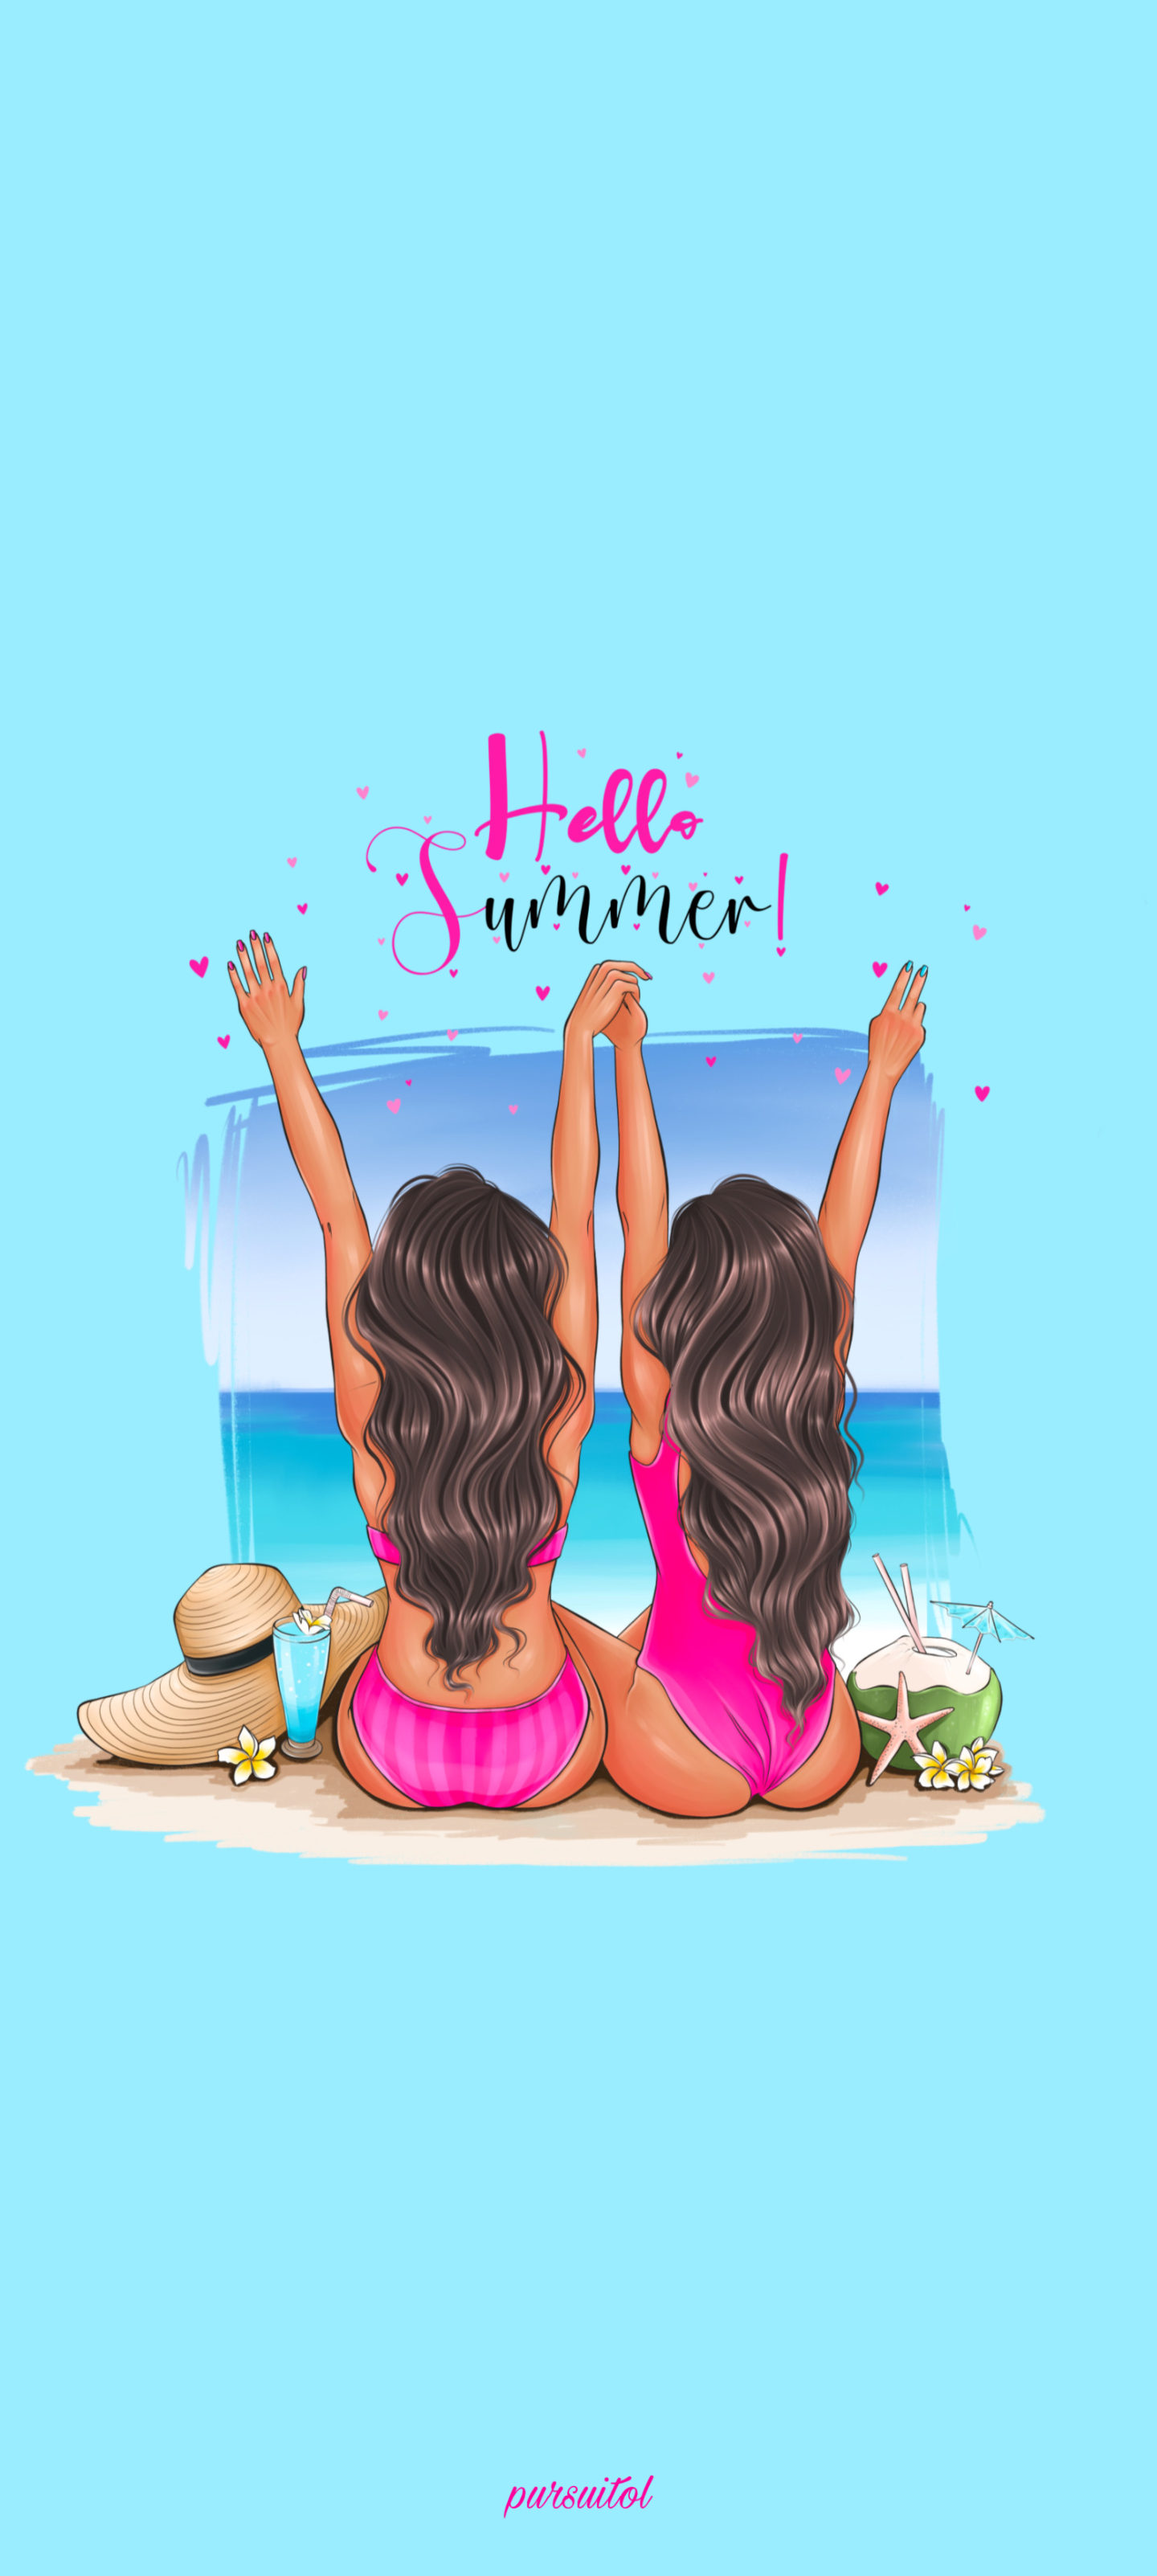 Blue phone wallpaper with girls or ladies in pink swimsuits in a beach scene with pink hello summer text and hearts.